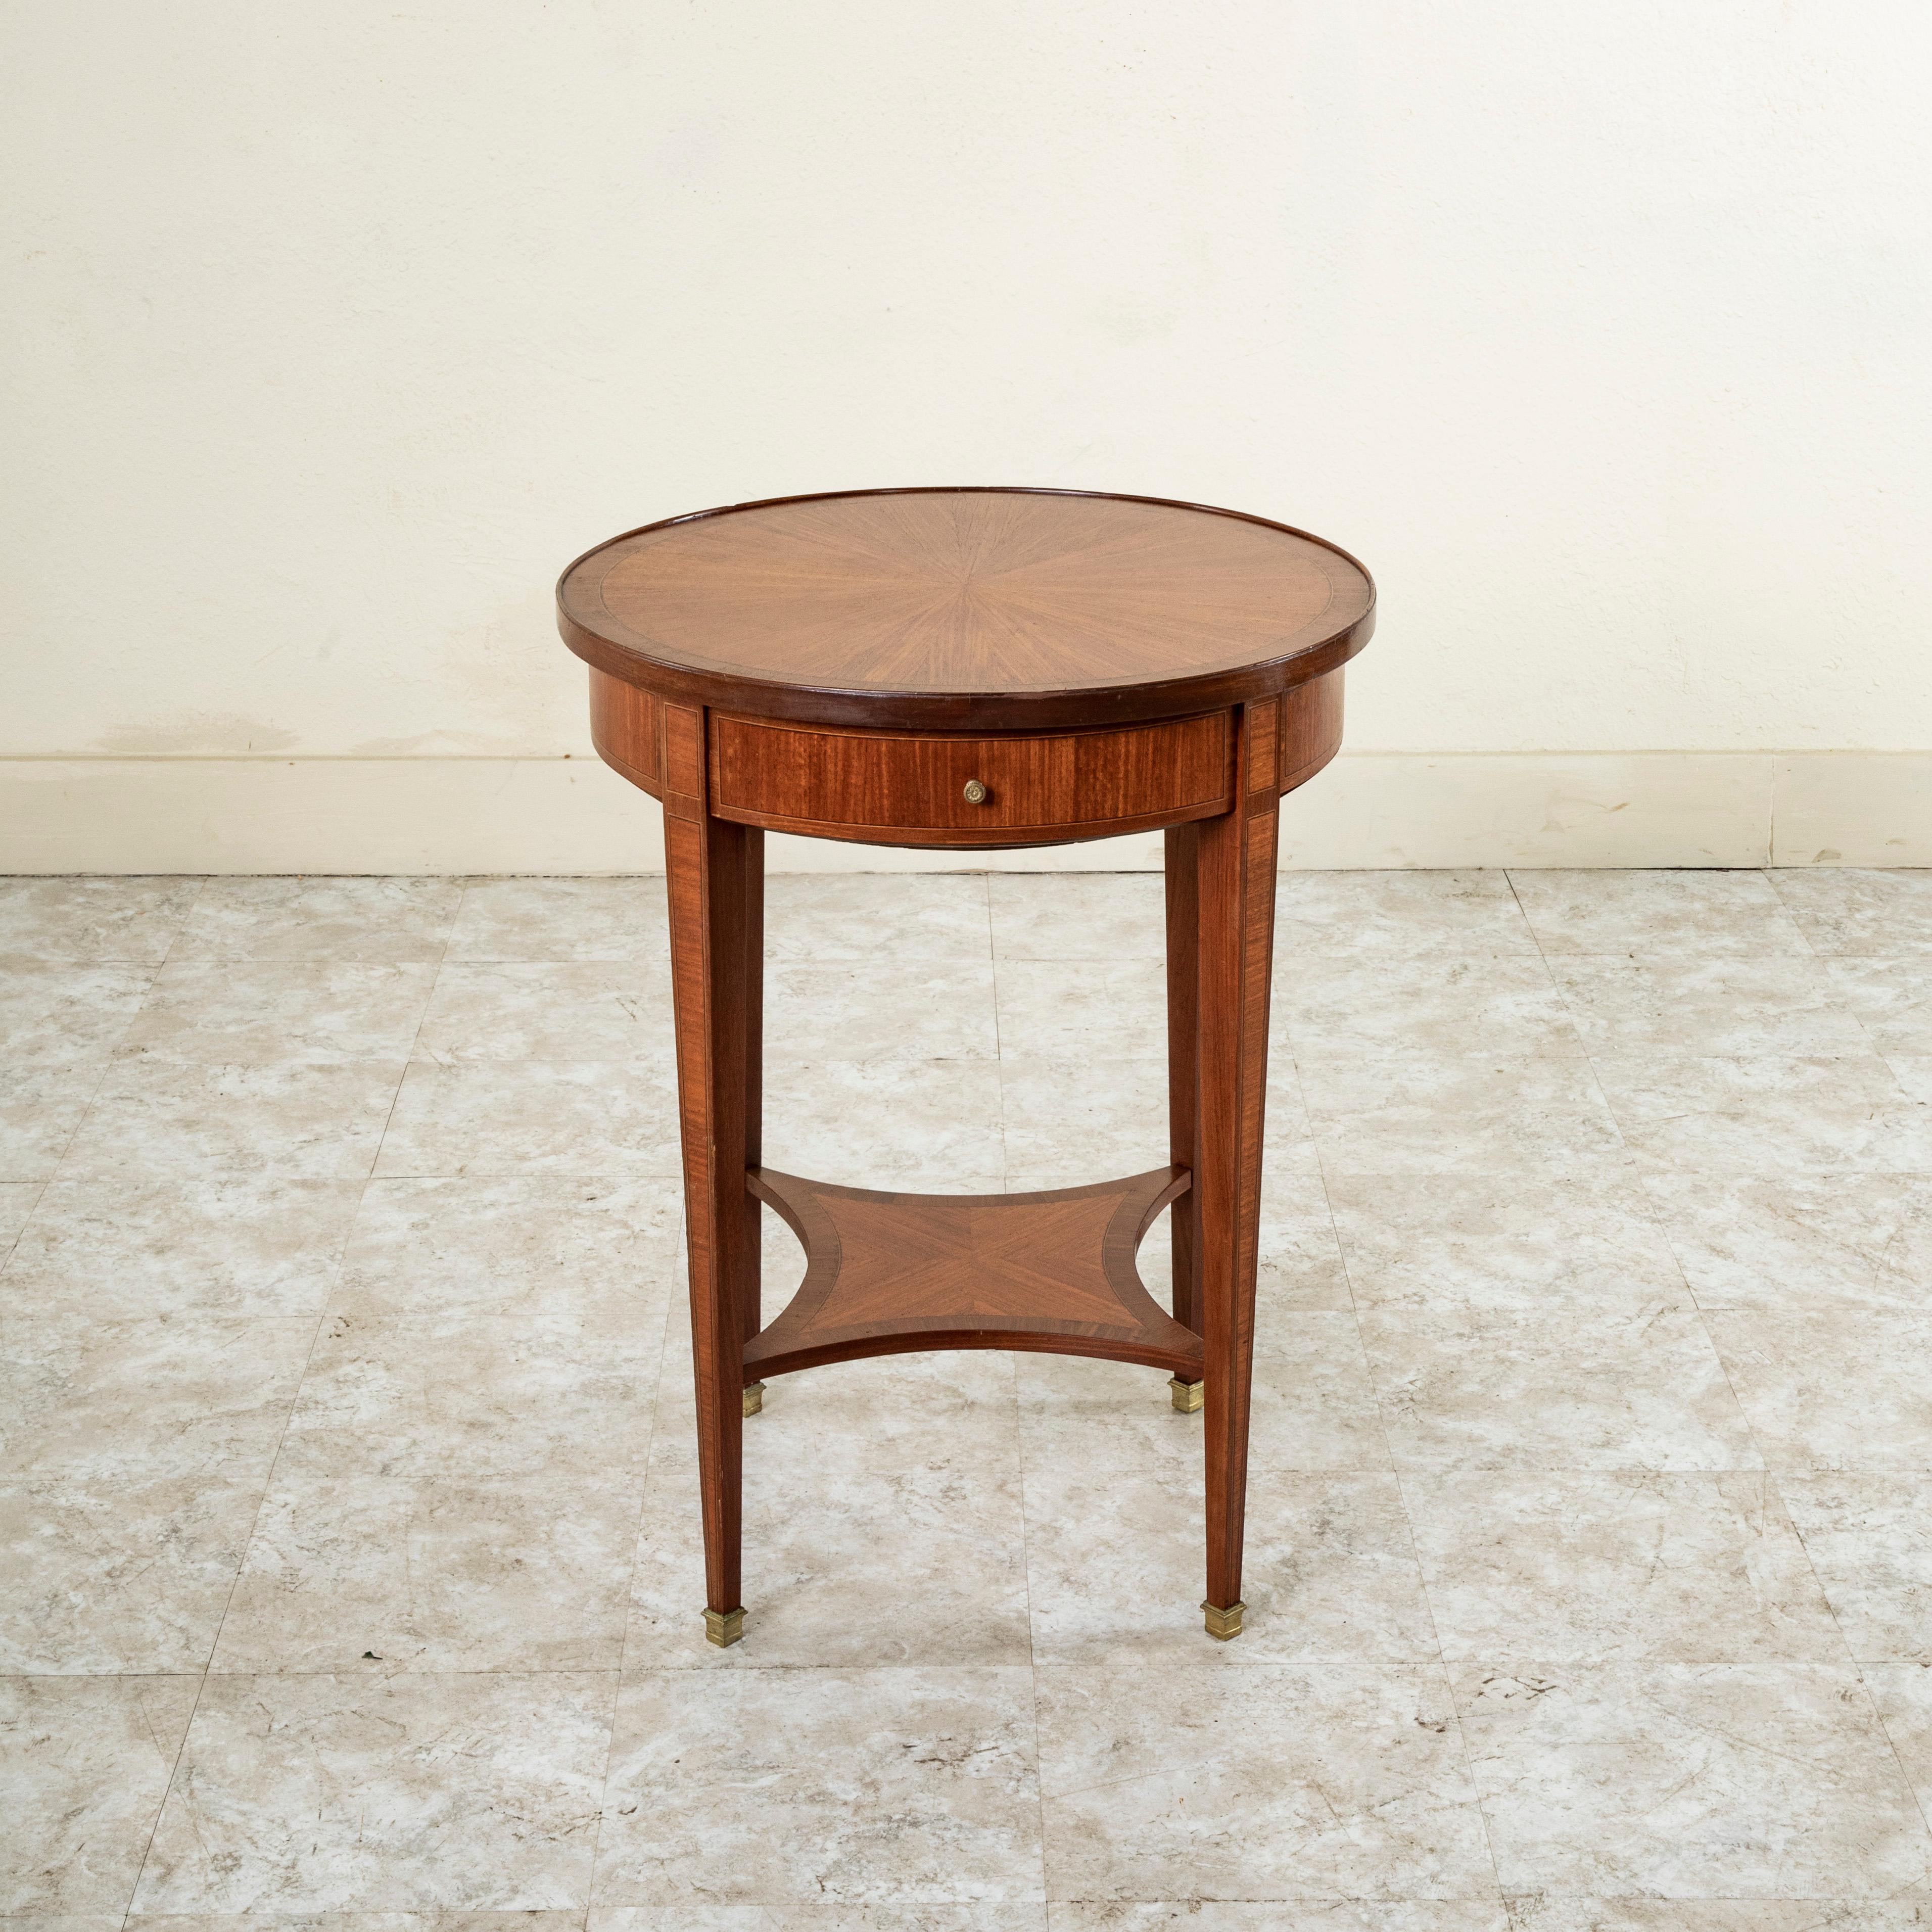 This early 20th century French Louis XVI style round rosewood side table features an marquetry top in a sunburst pattern with an inset border of fine lines of lemon wood and ebonized pearwood. The inset border pattern is repeated on the apron below